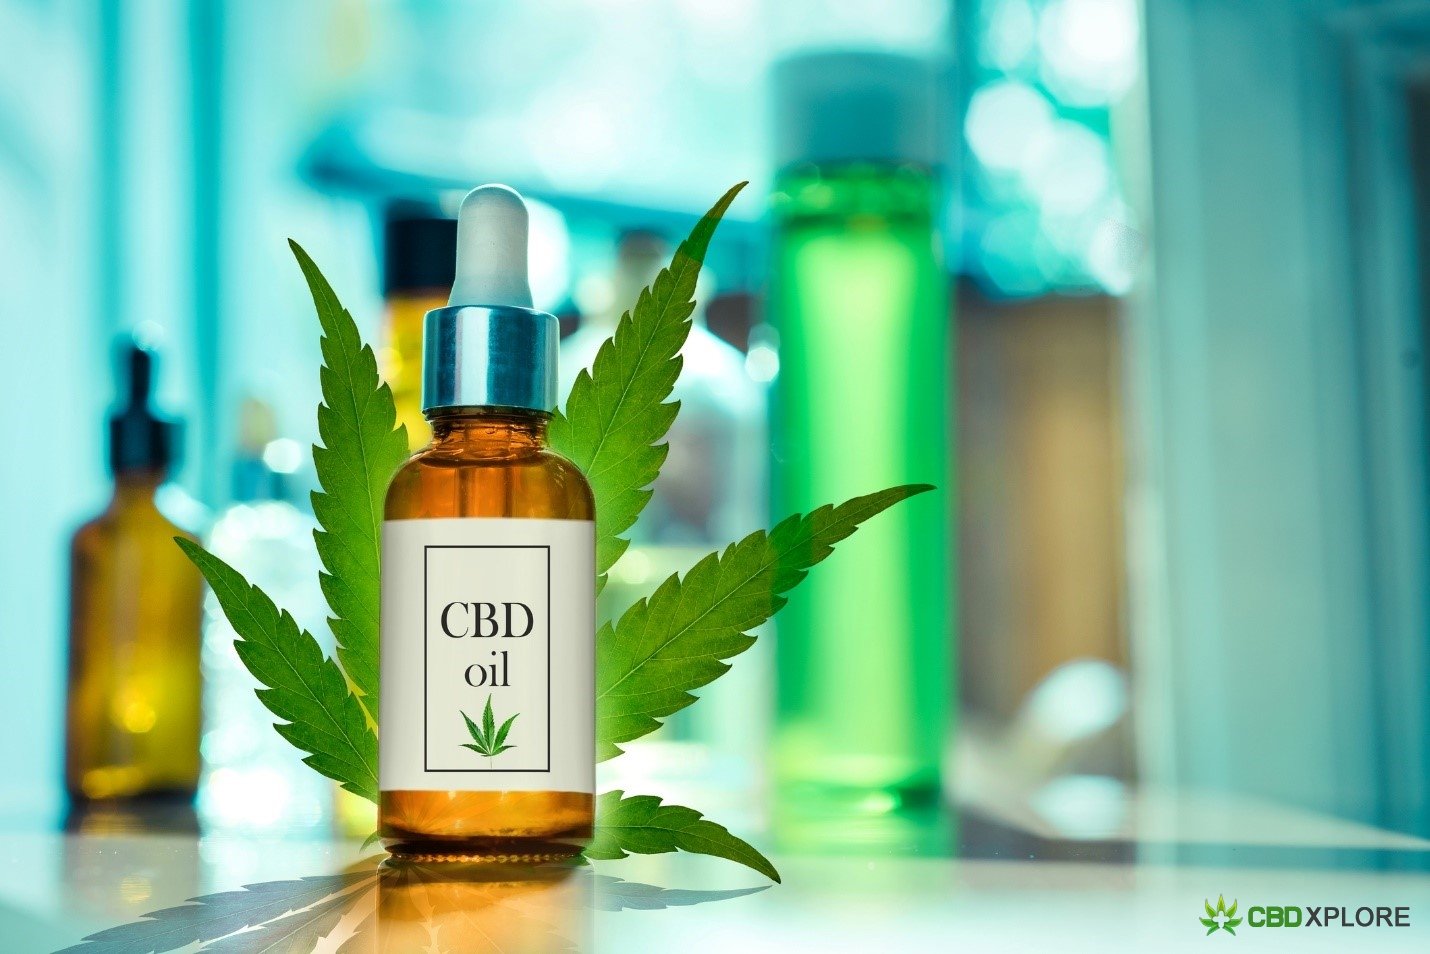 Good CBD Pain Relief Product